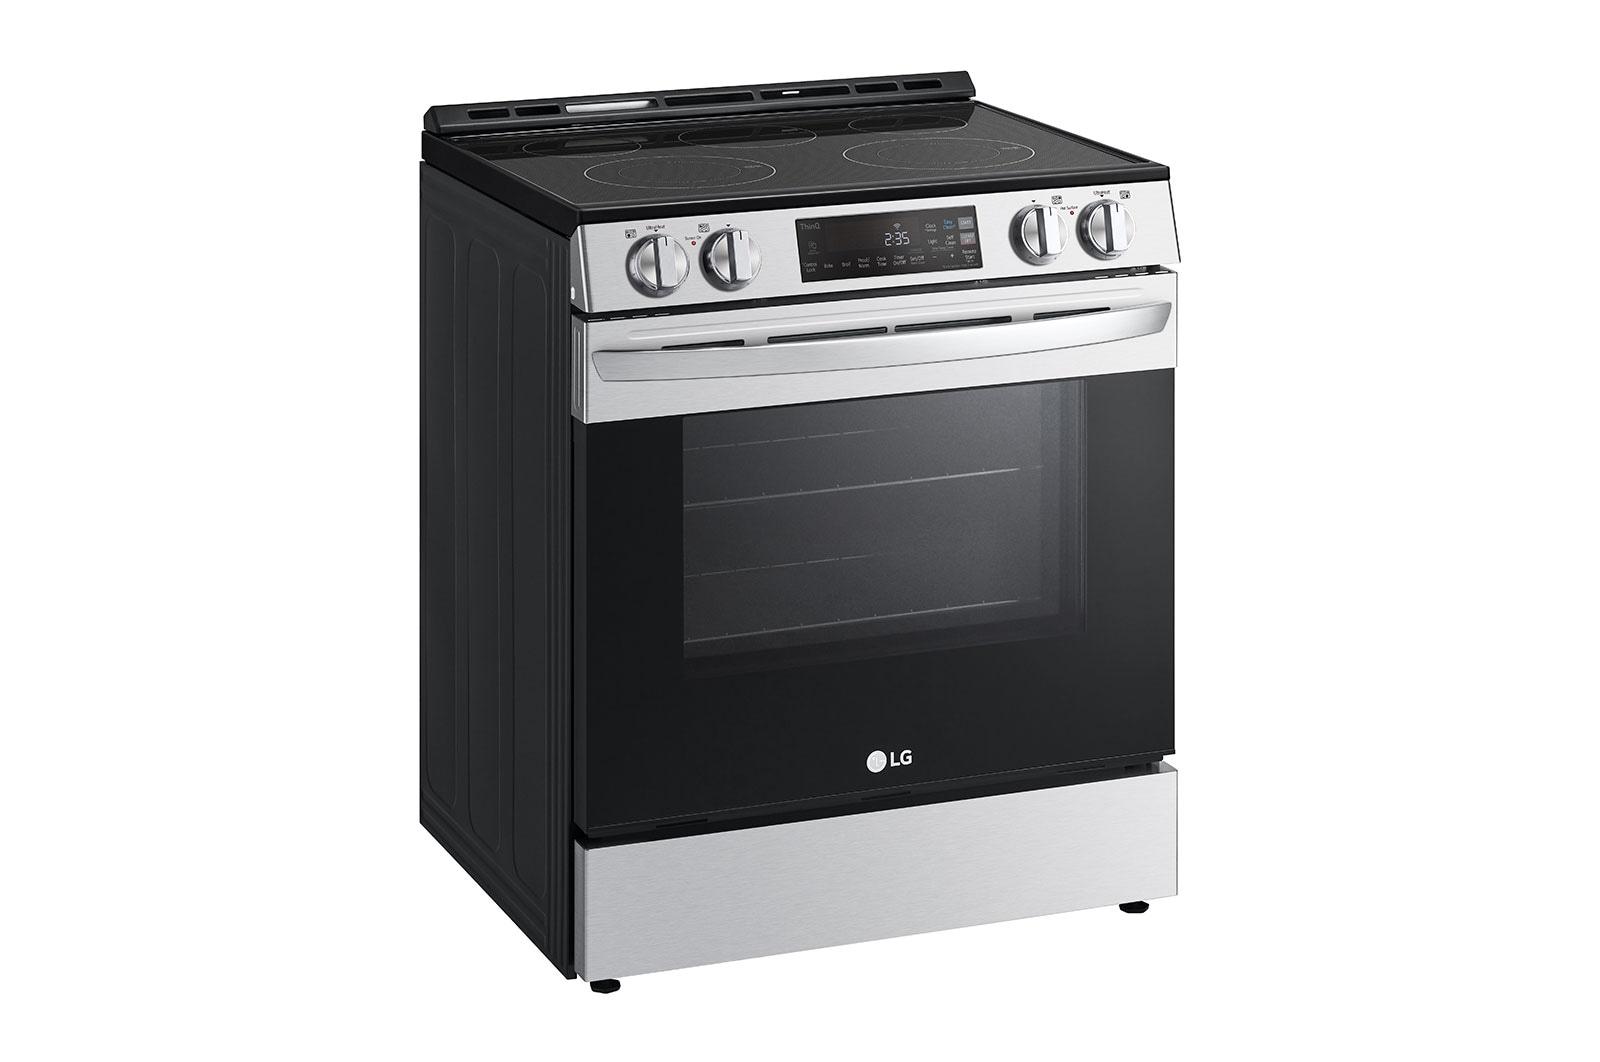 Lg 6.3 cu ft. Smart Wi-Fi Enabled Electric Slide-in Range with EasyClean®